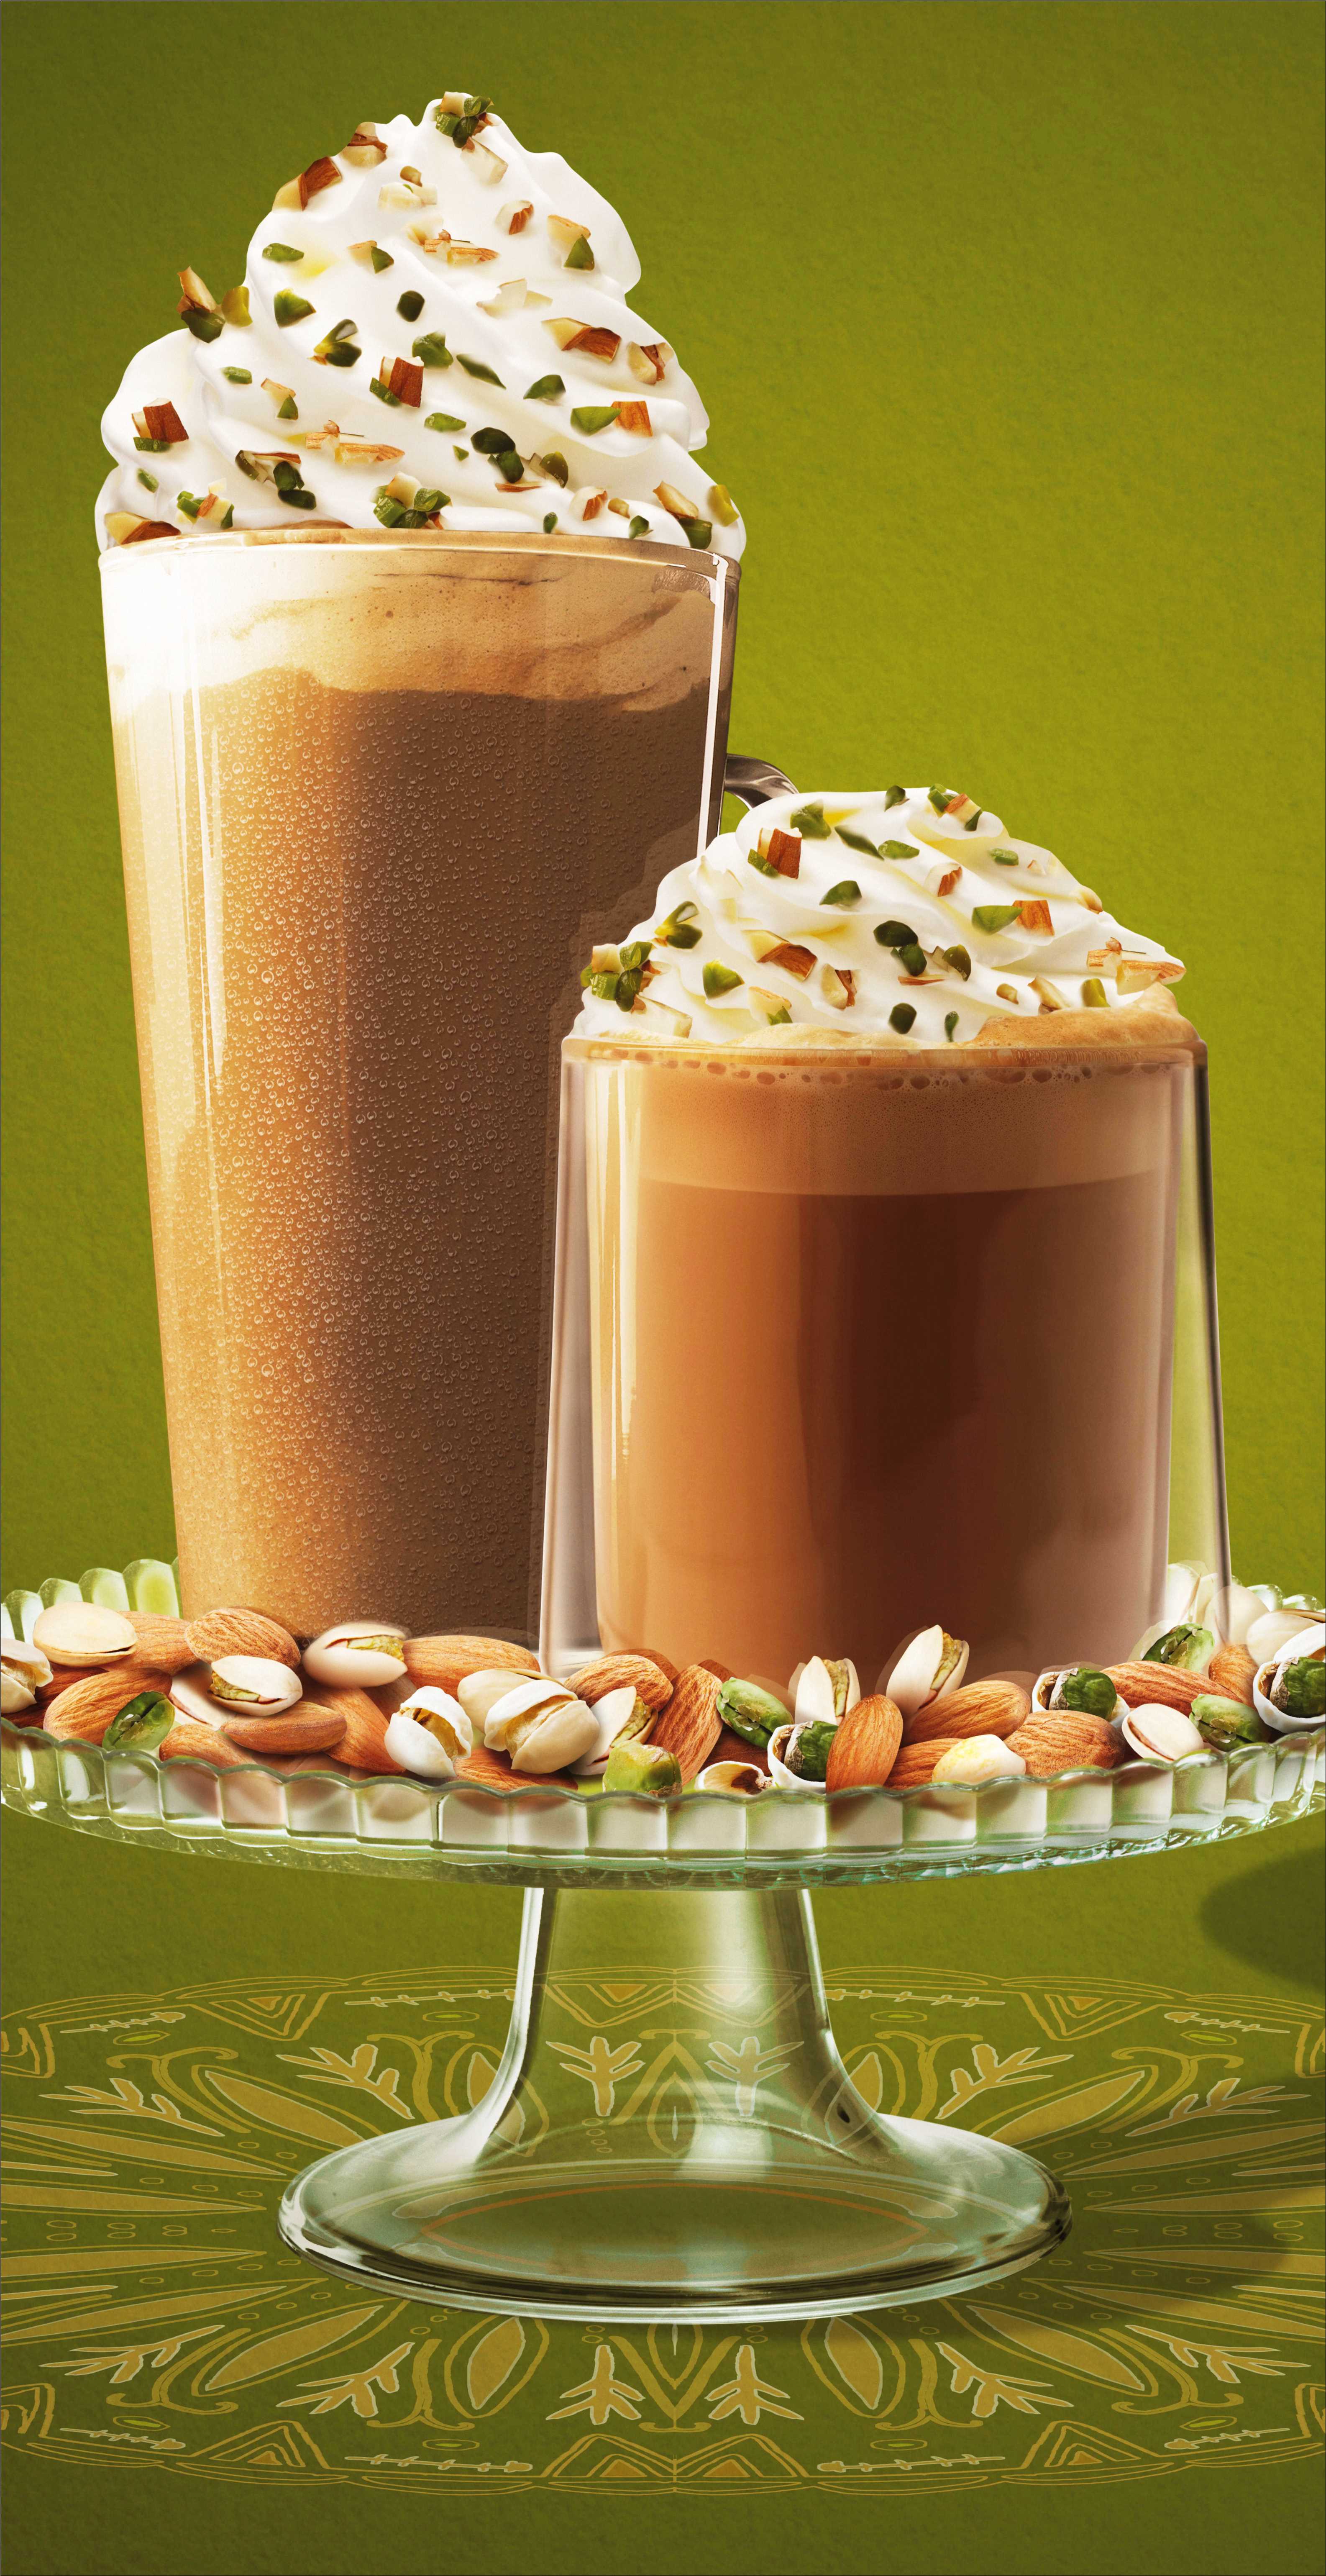 Read more about the article Celebrate special moments this Diwali with Starbucks’ Indulgences